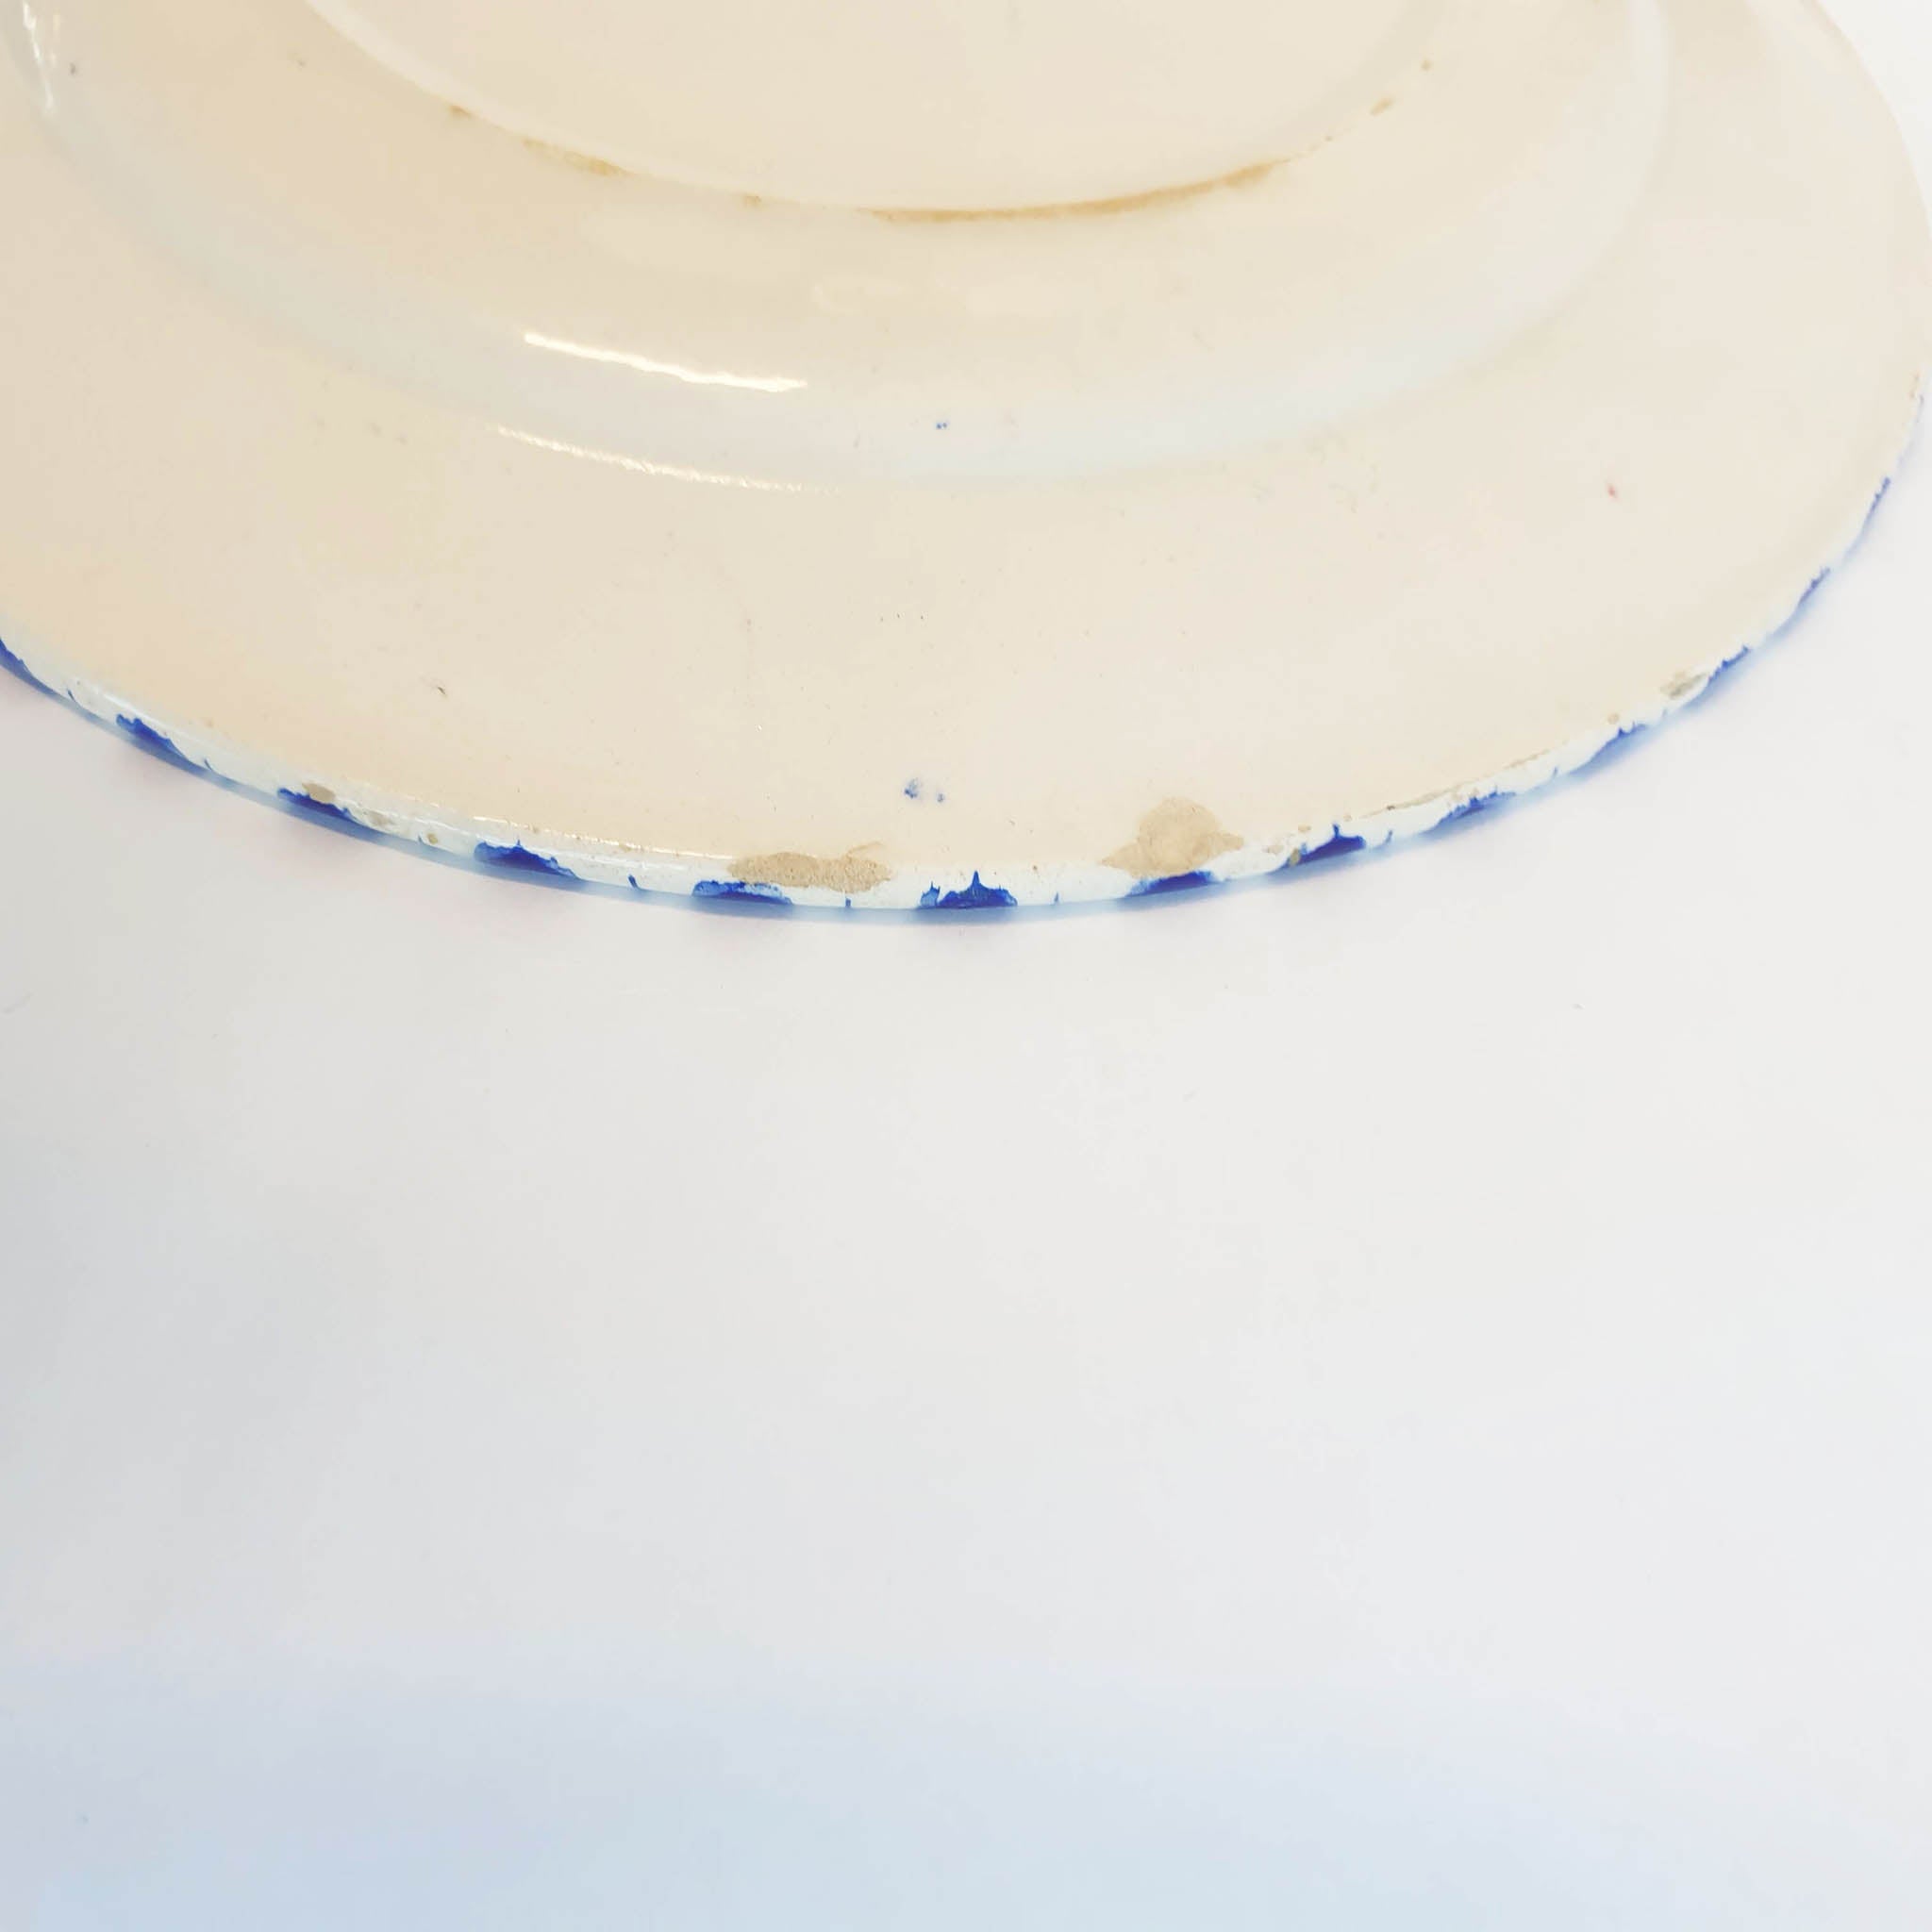 Mid-century plate with blue hand-painted decoration